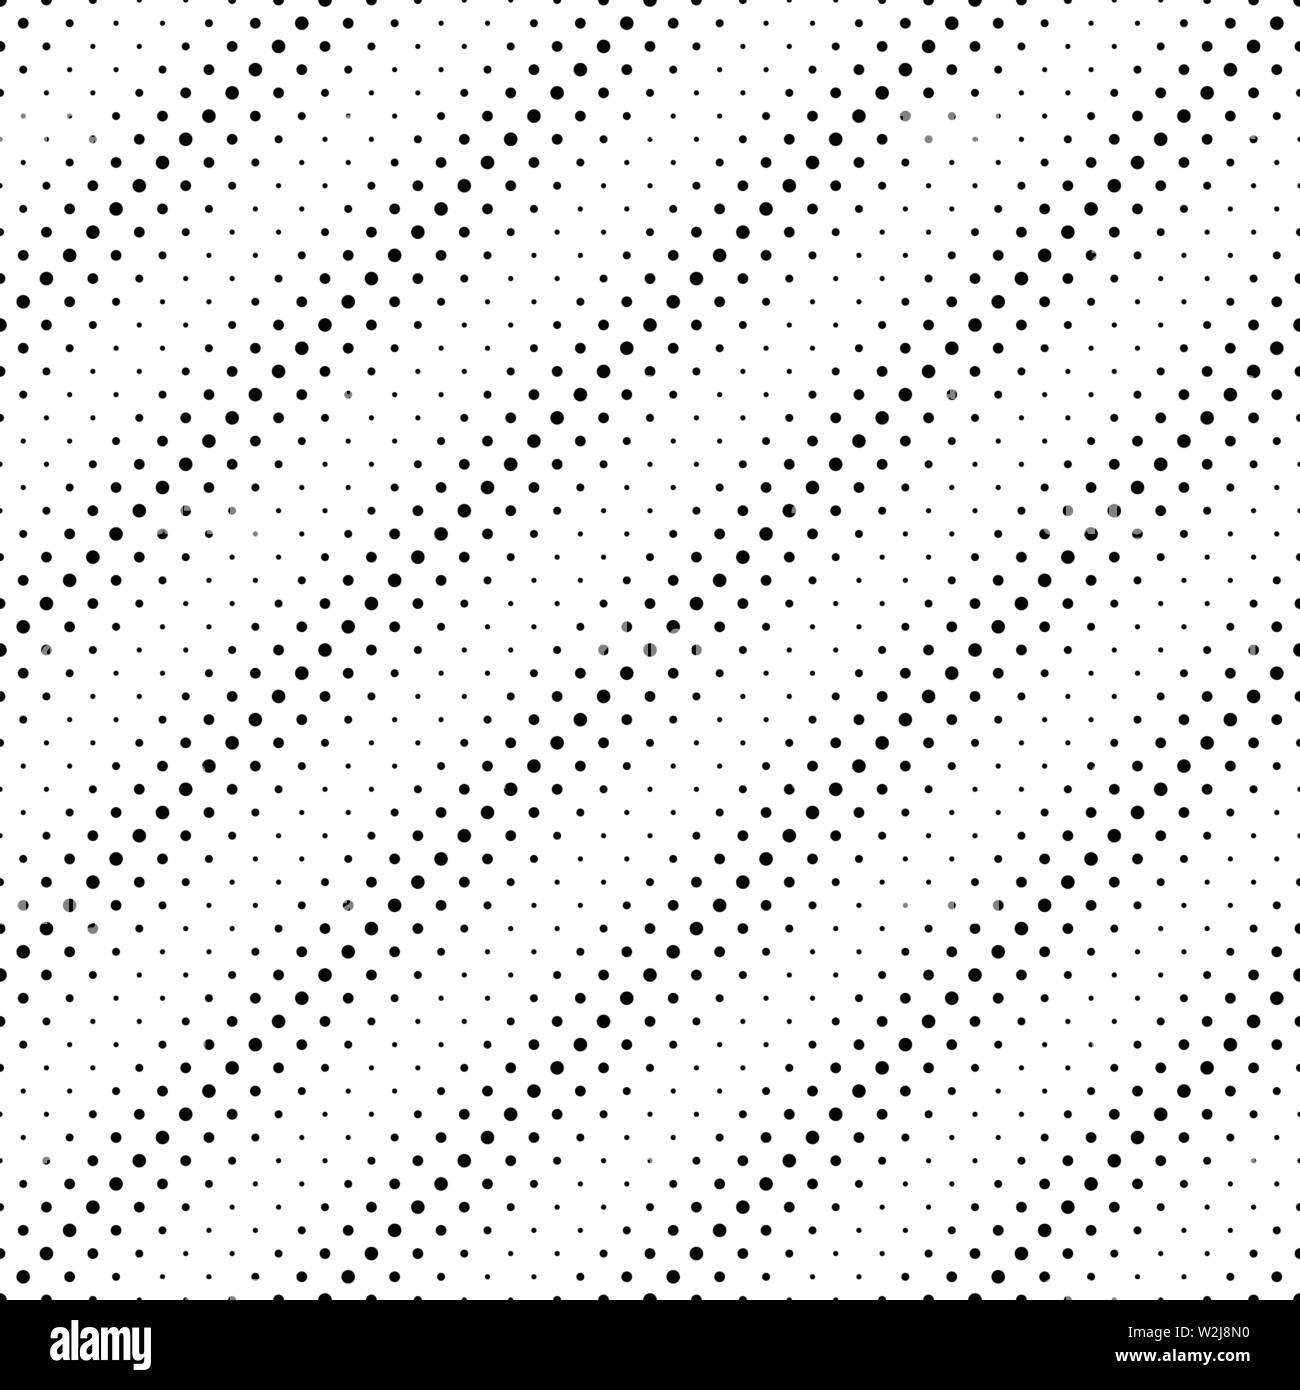 Seamless circle pattern background - black and white abstract vector graphic from dots Stock Vector